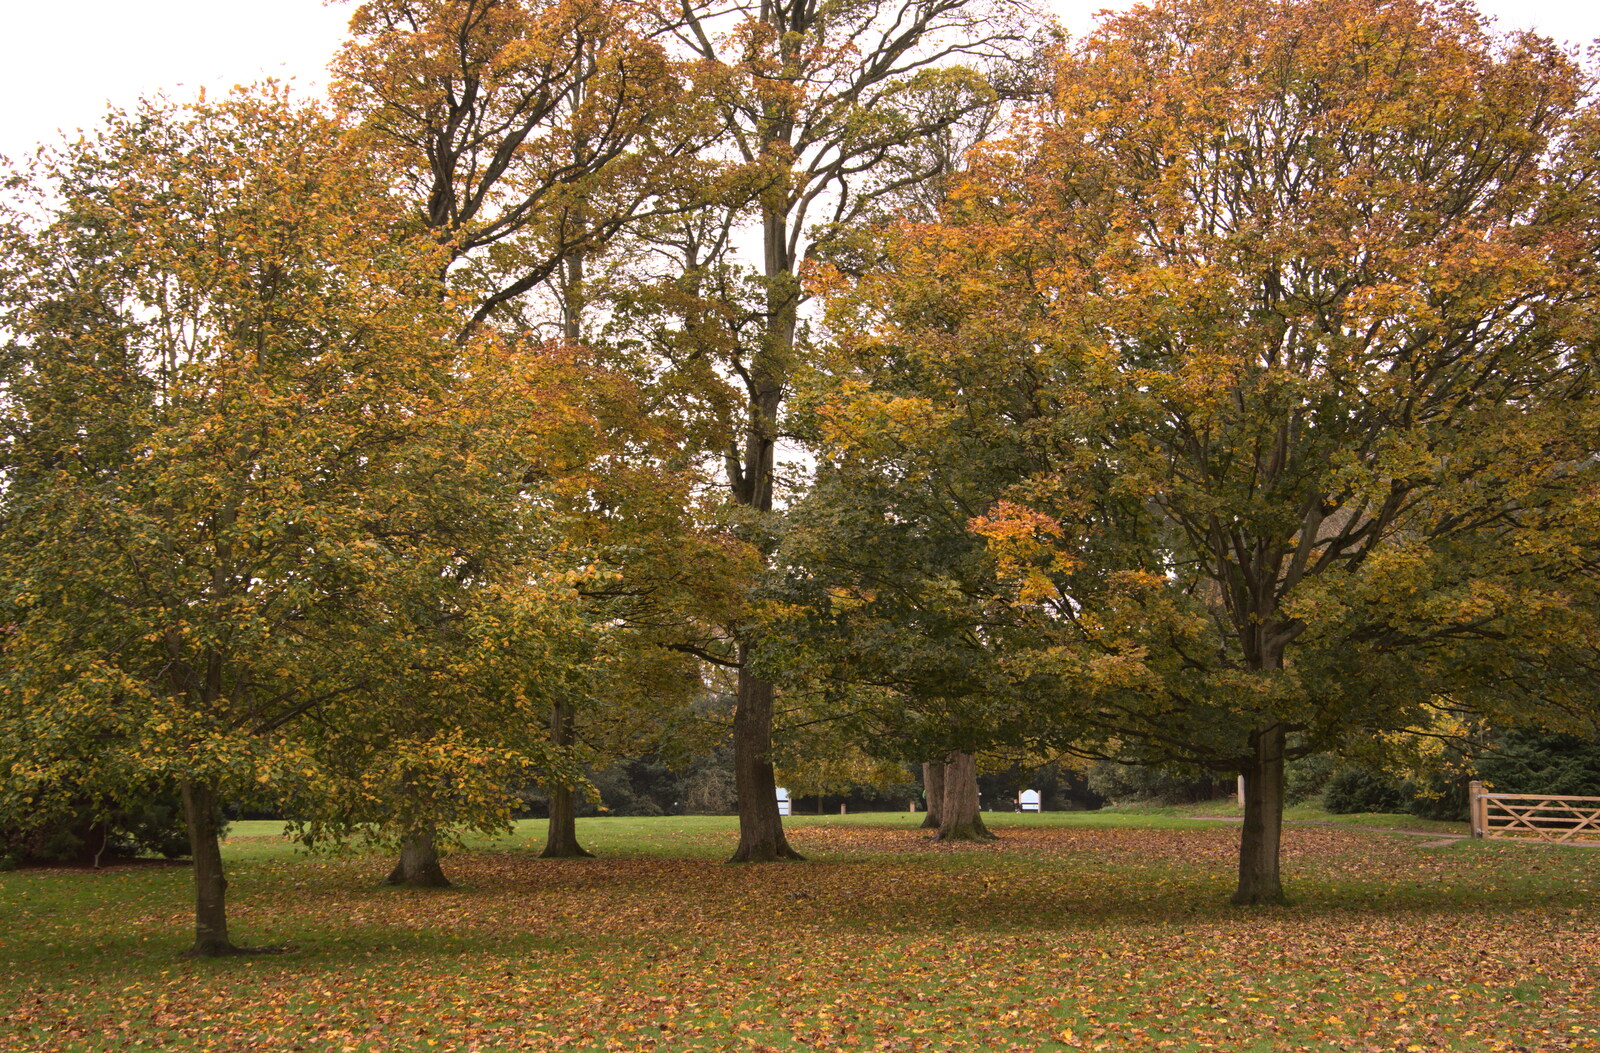 Nice autumn trees from A Trip to Sandringham Estate, Norfolk - 31st October 2020